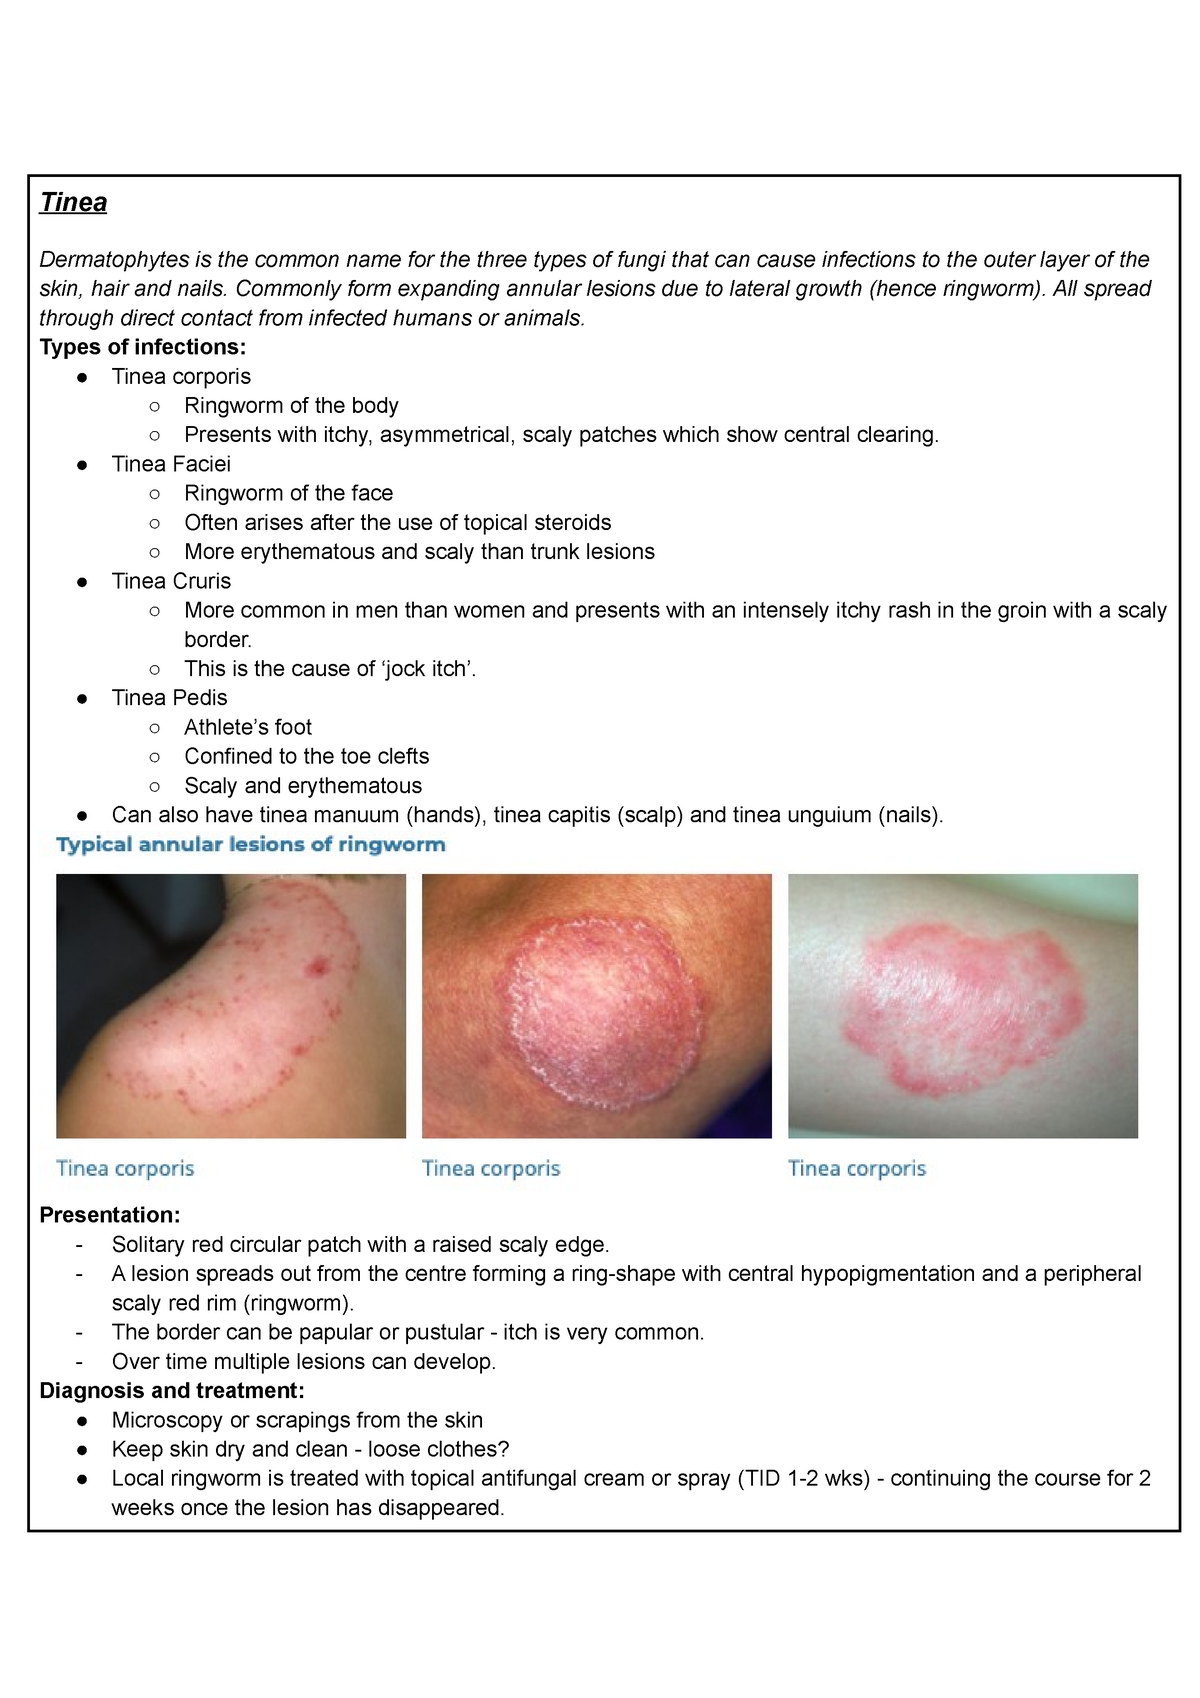 Fungal Skin Infections - Tinea Dermatophytes is the common name for the  three types of fungi that - Studocu